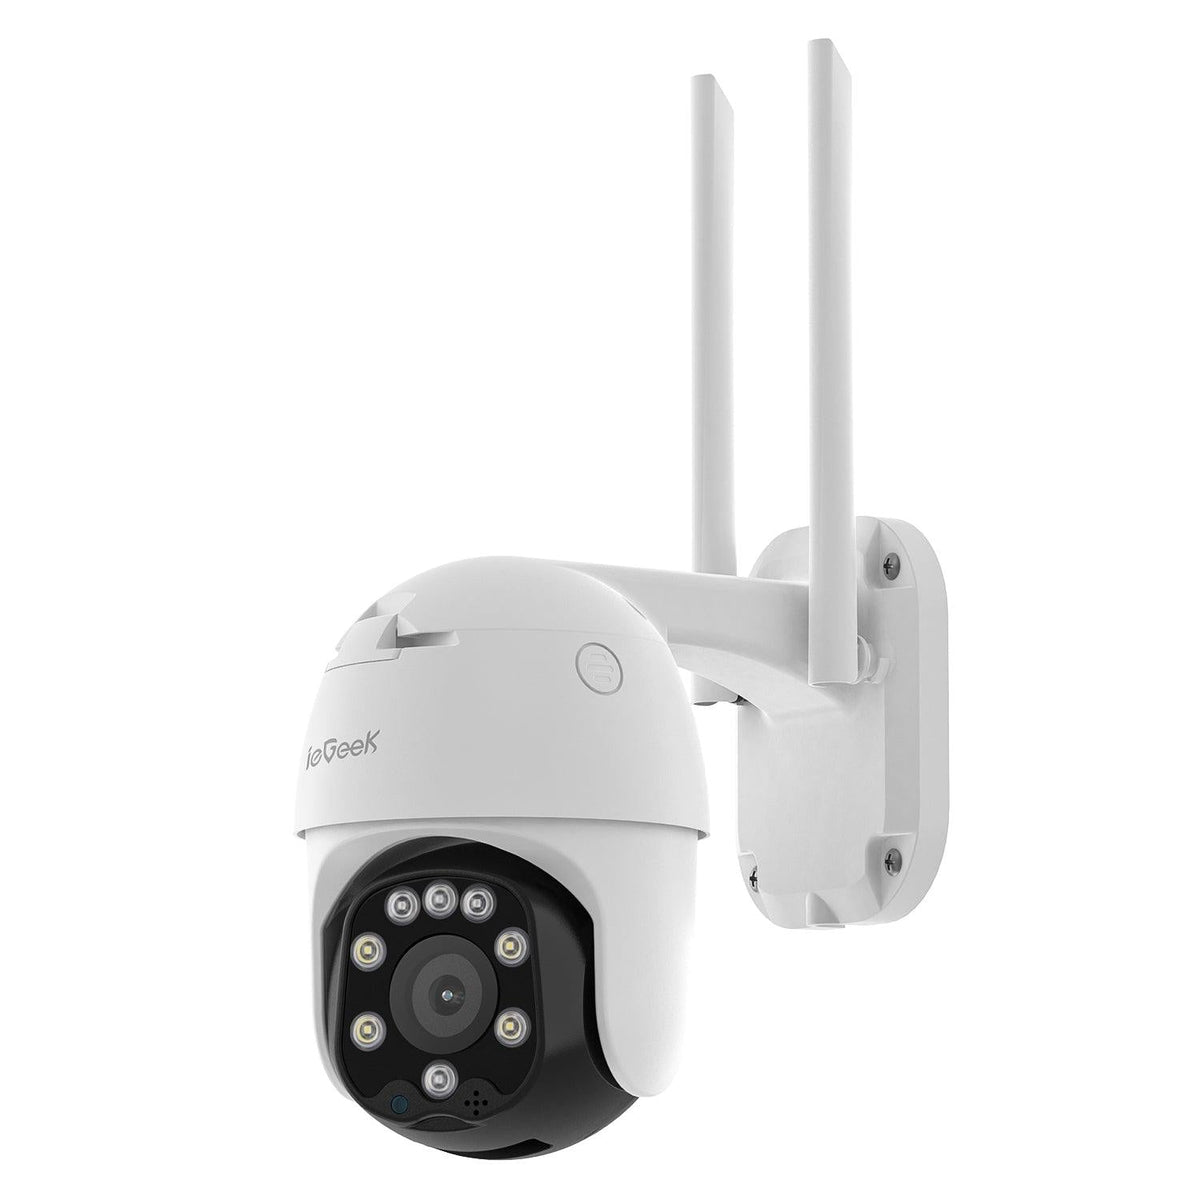 IeGeek Night Vision CCTV Camera, For Security at Rs 2800 in Lucknow